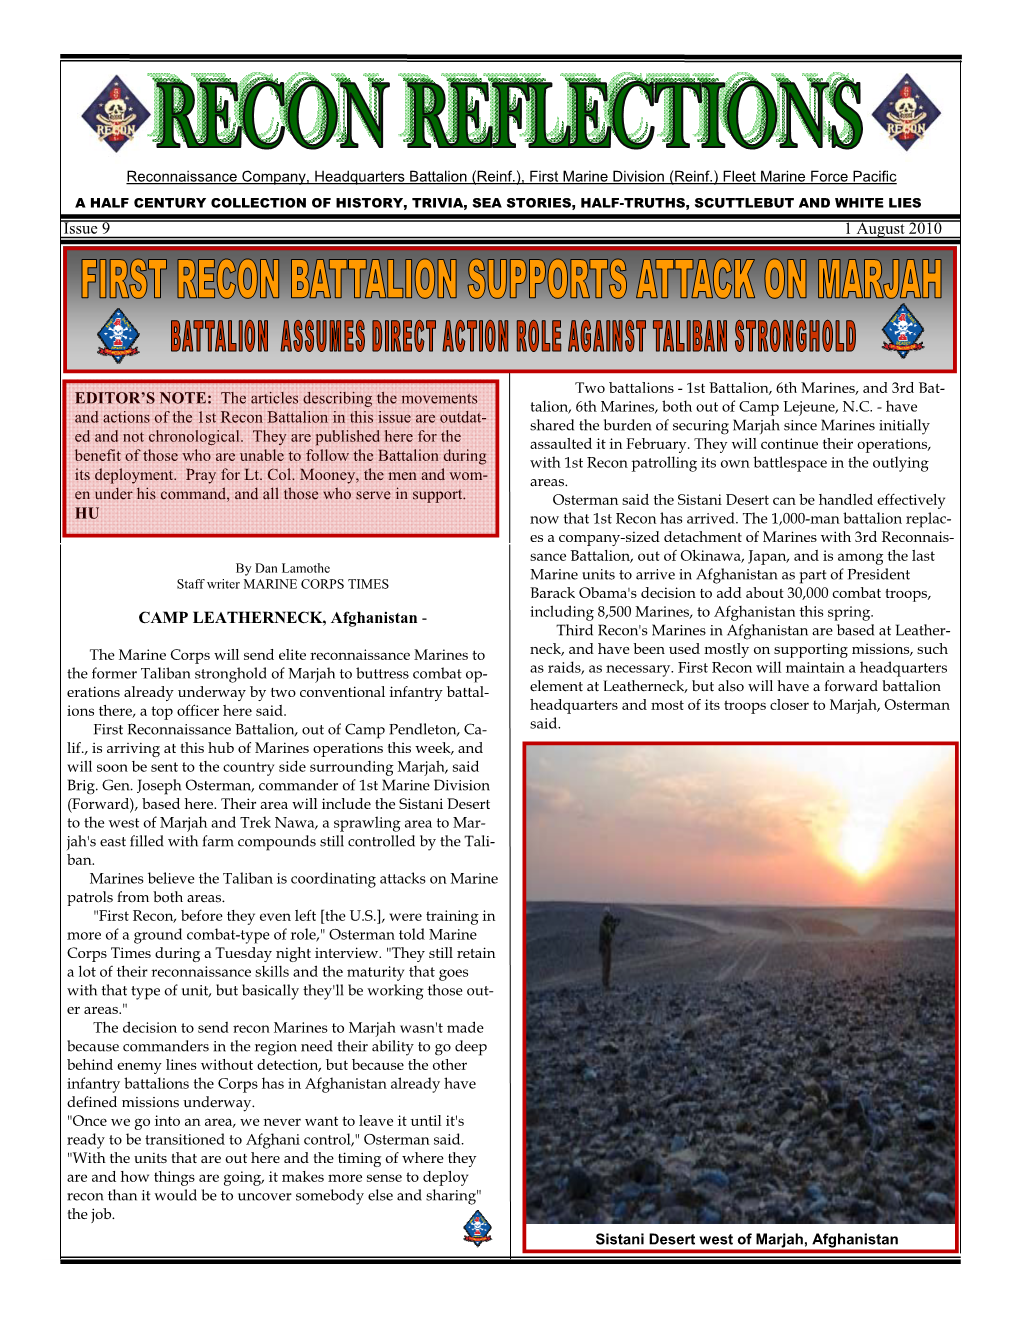 Recon Reflections Issue 9.Pdf